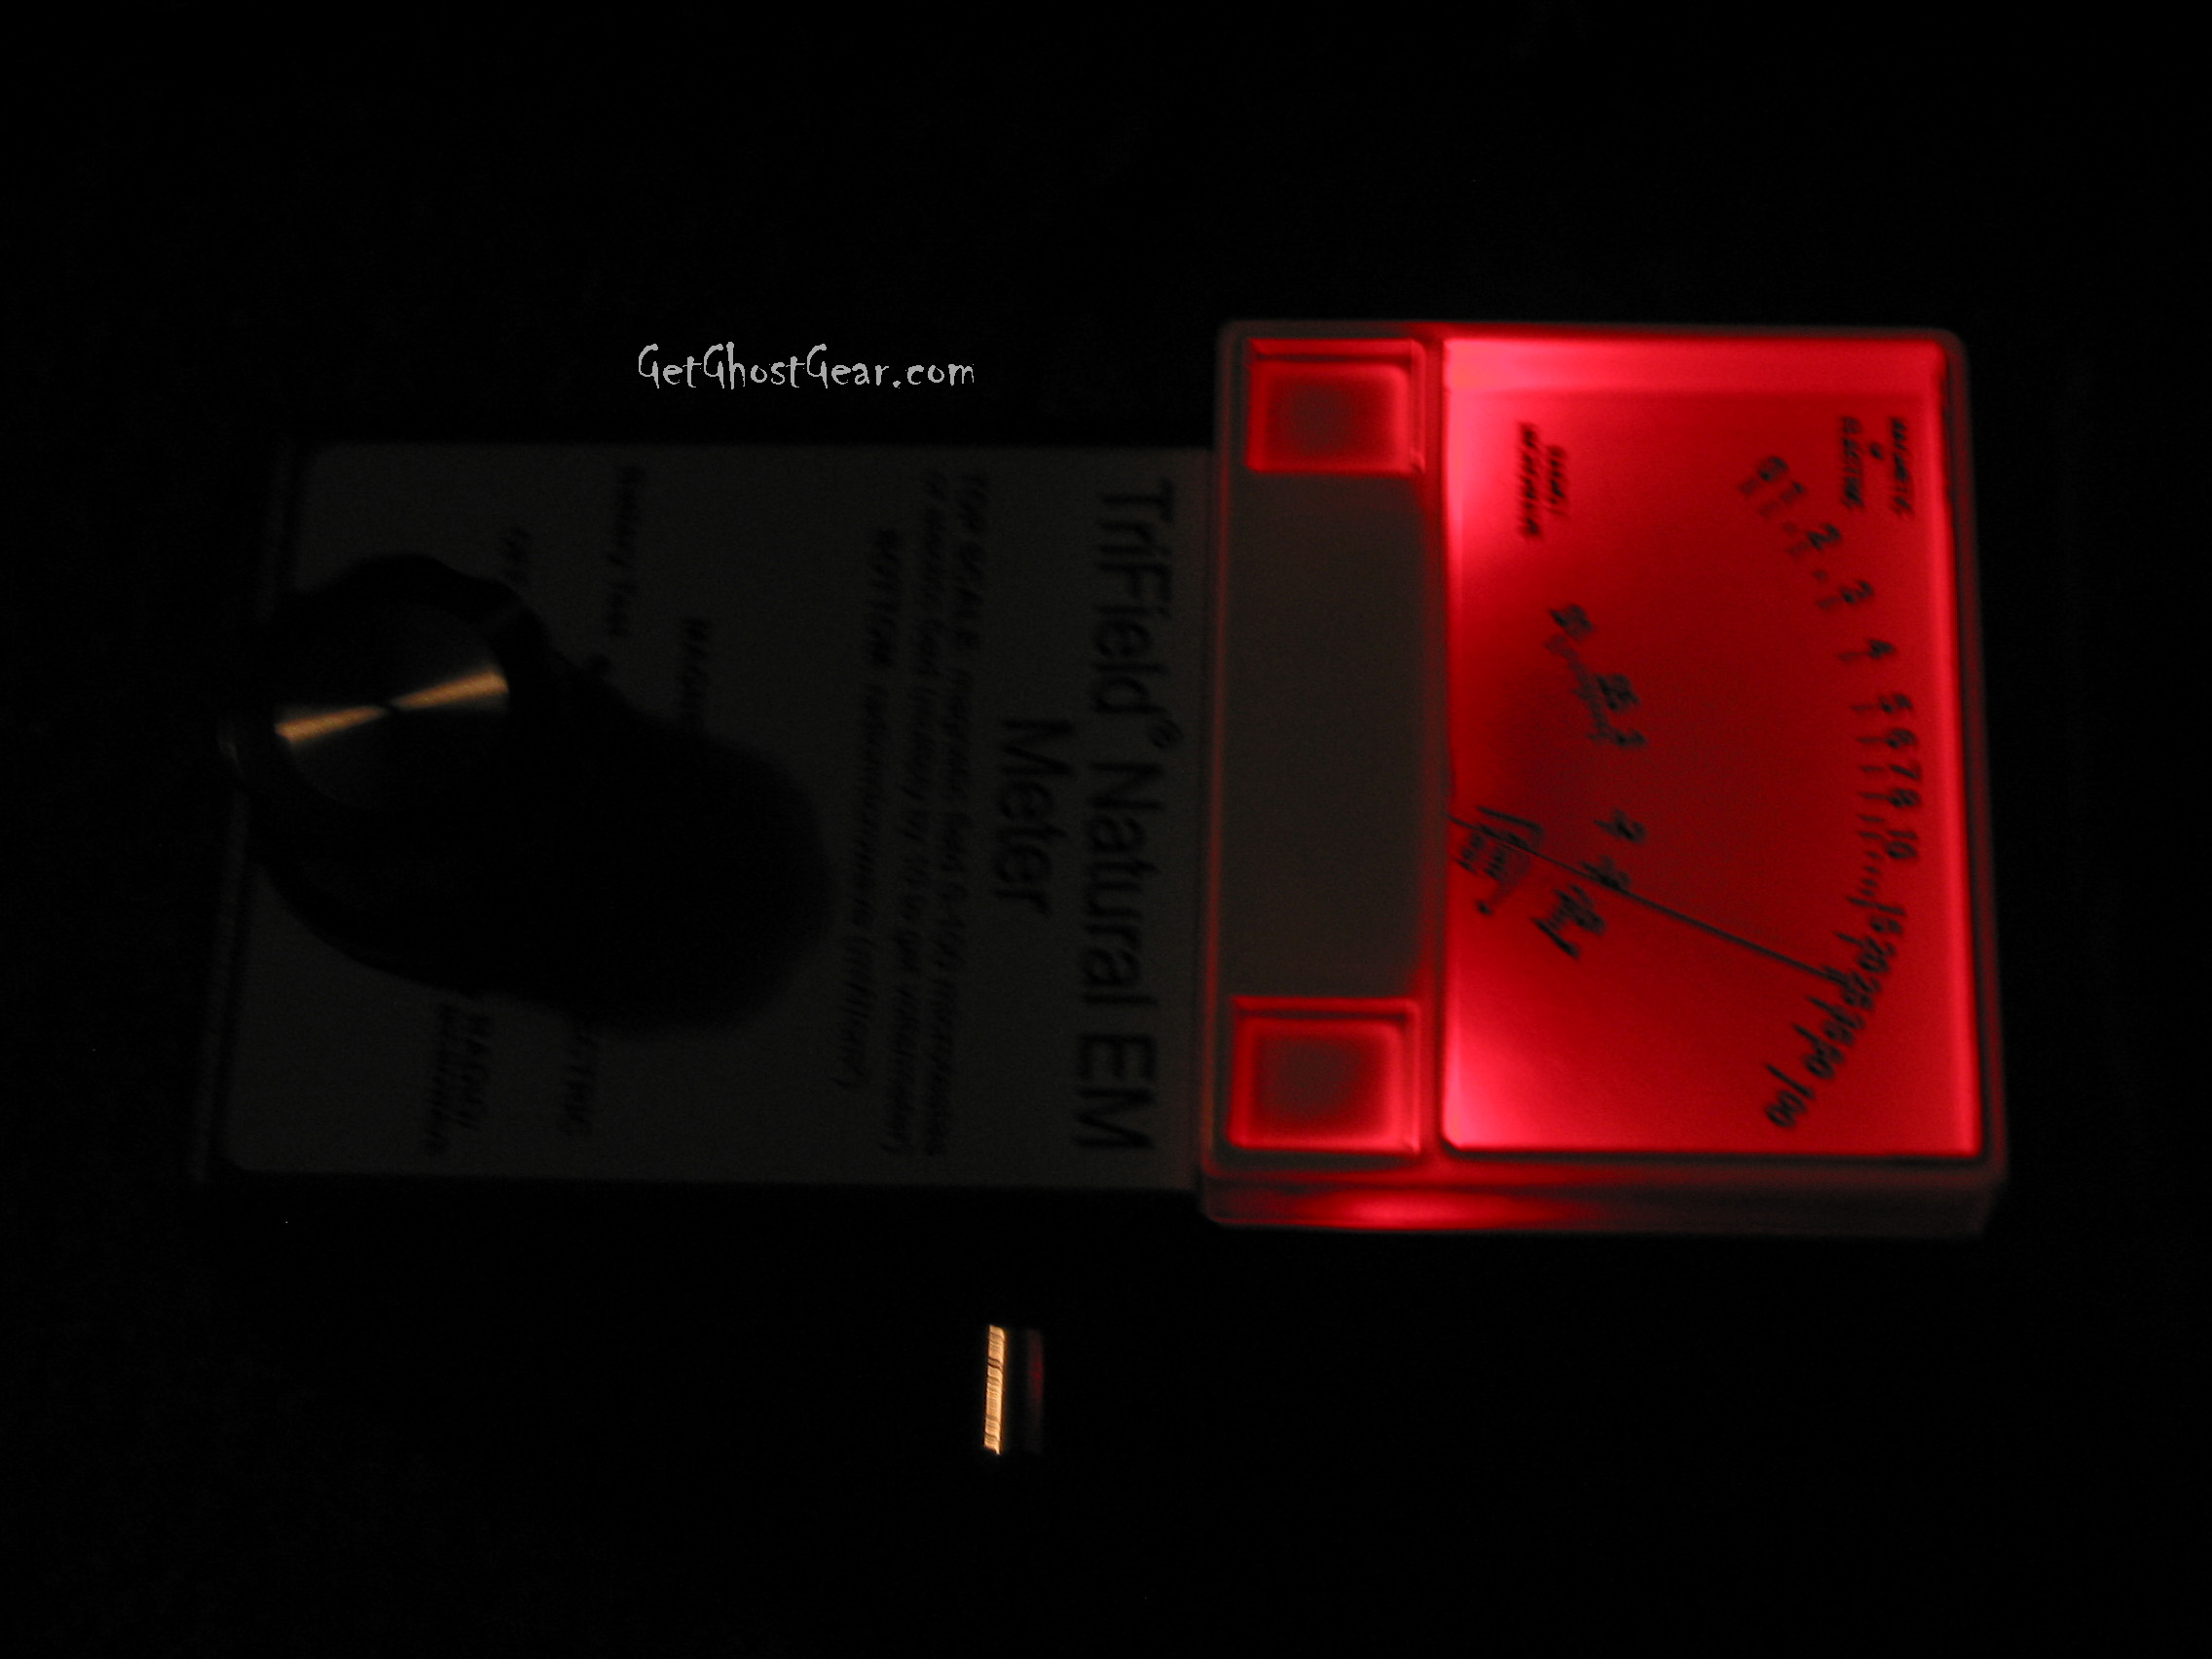 Three axis analog DC emf meter for ghost hunting